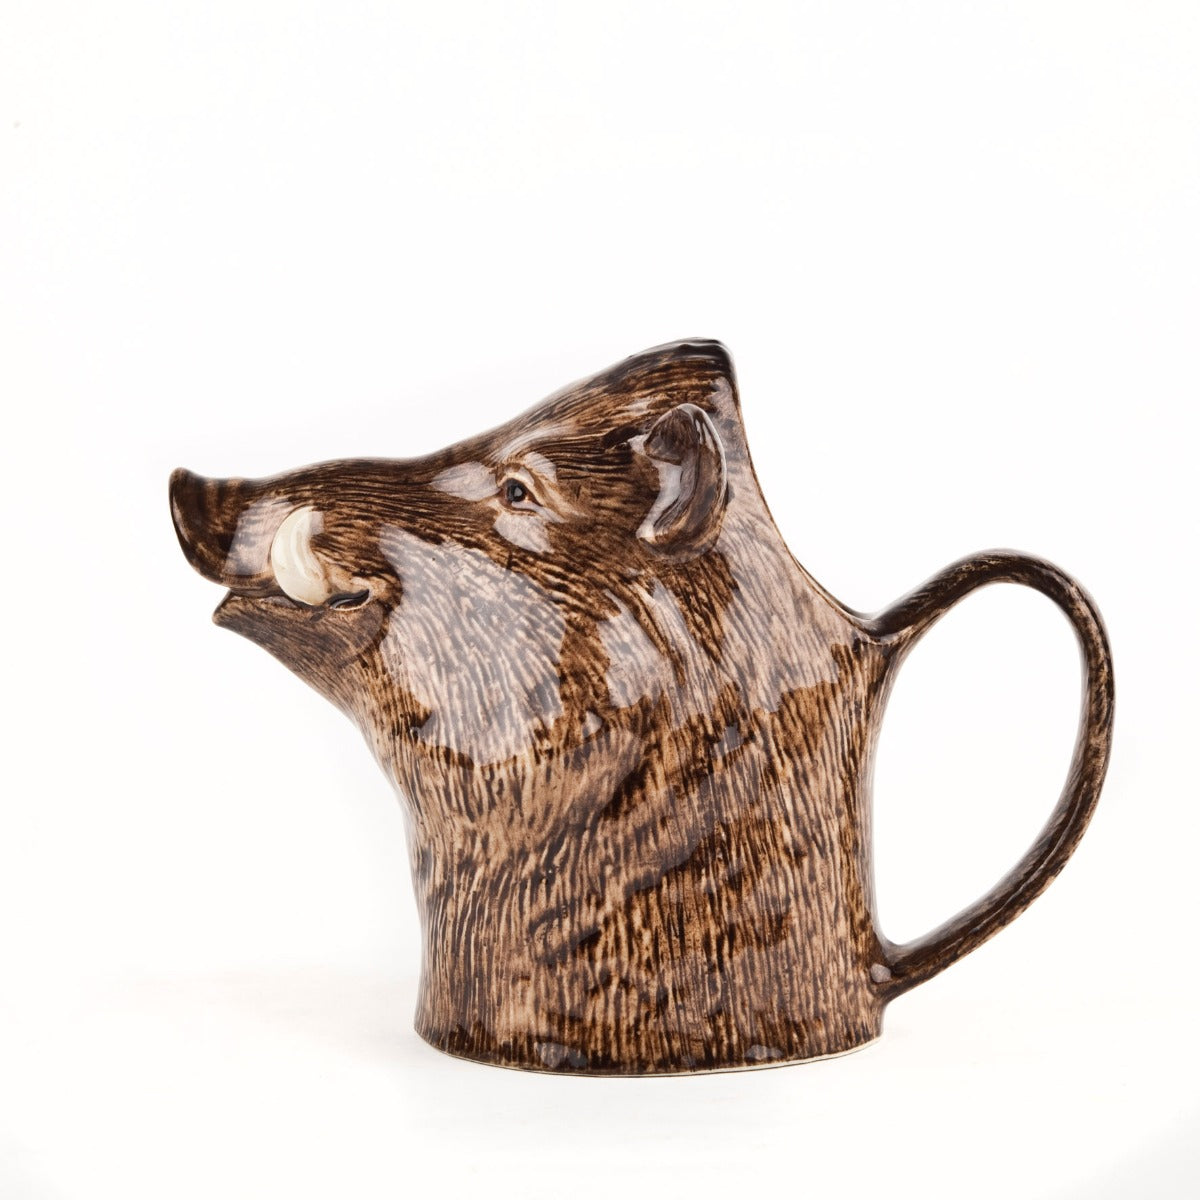 Wild Boar Jug- 3 sizes available